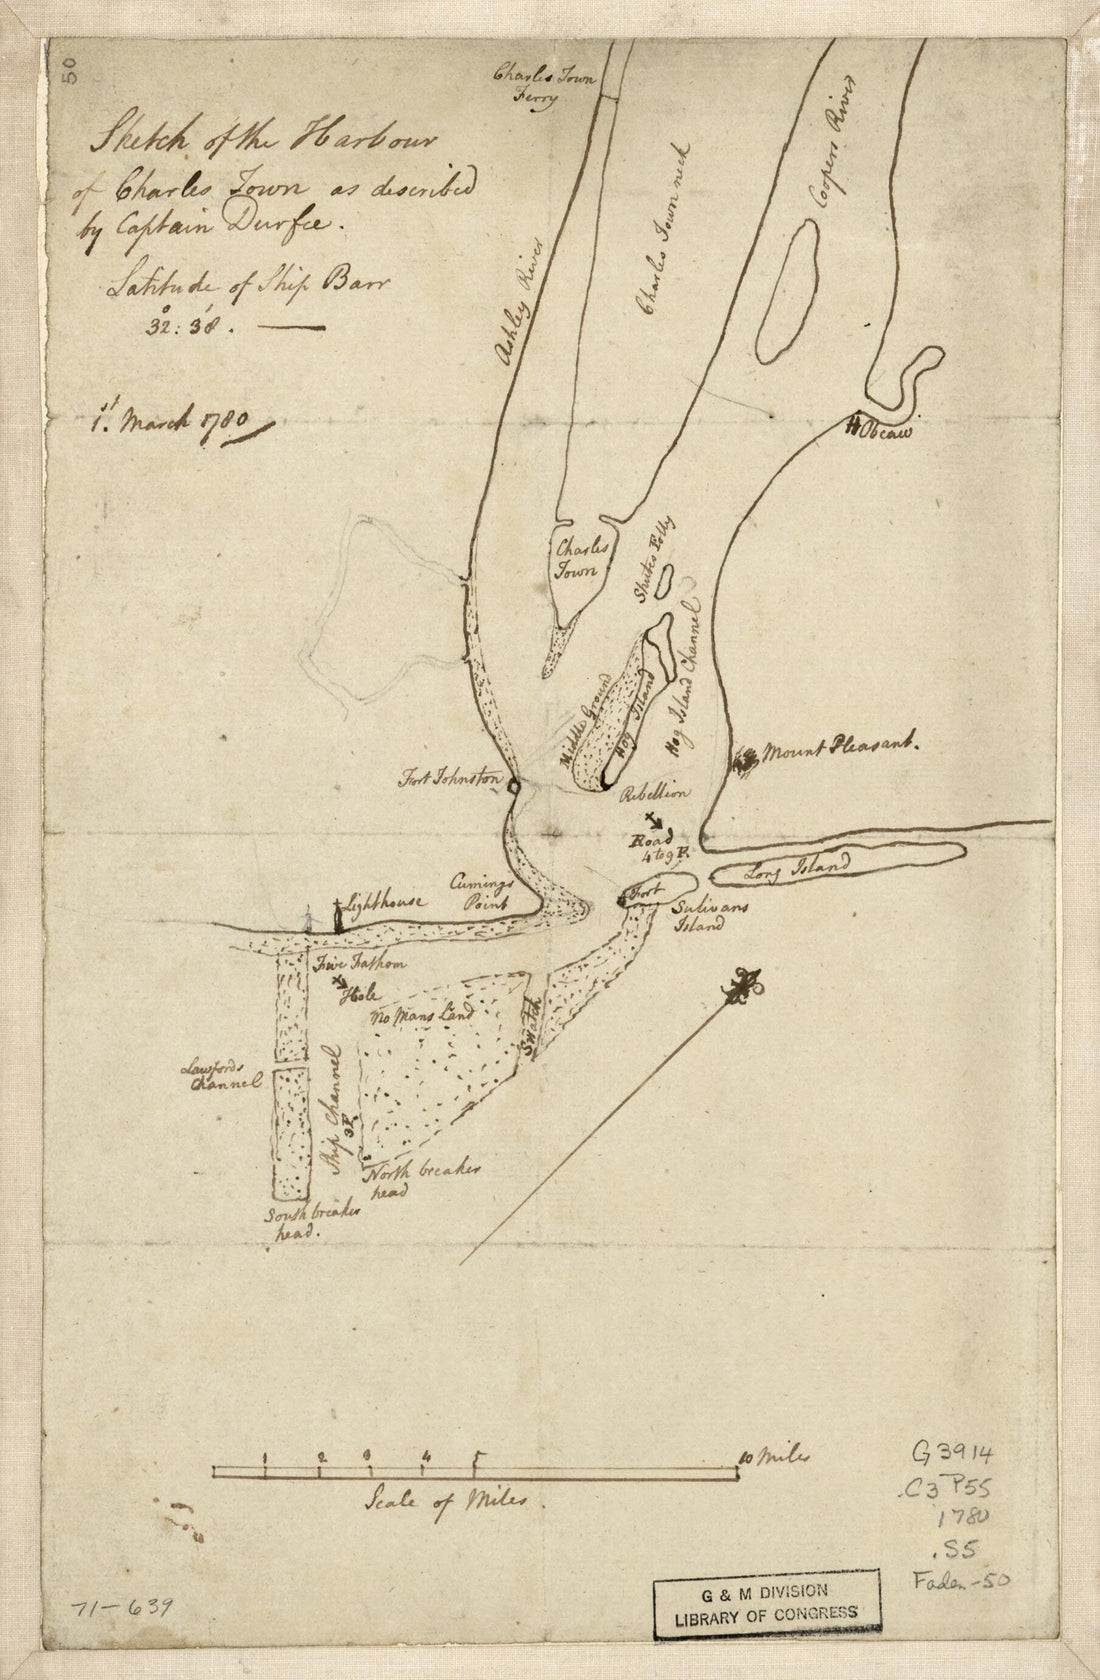 This old map of Sketch of the Harbour of Charles Town from 1780 was created by  Durfee in 1780